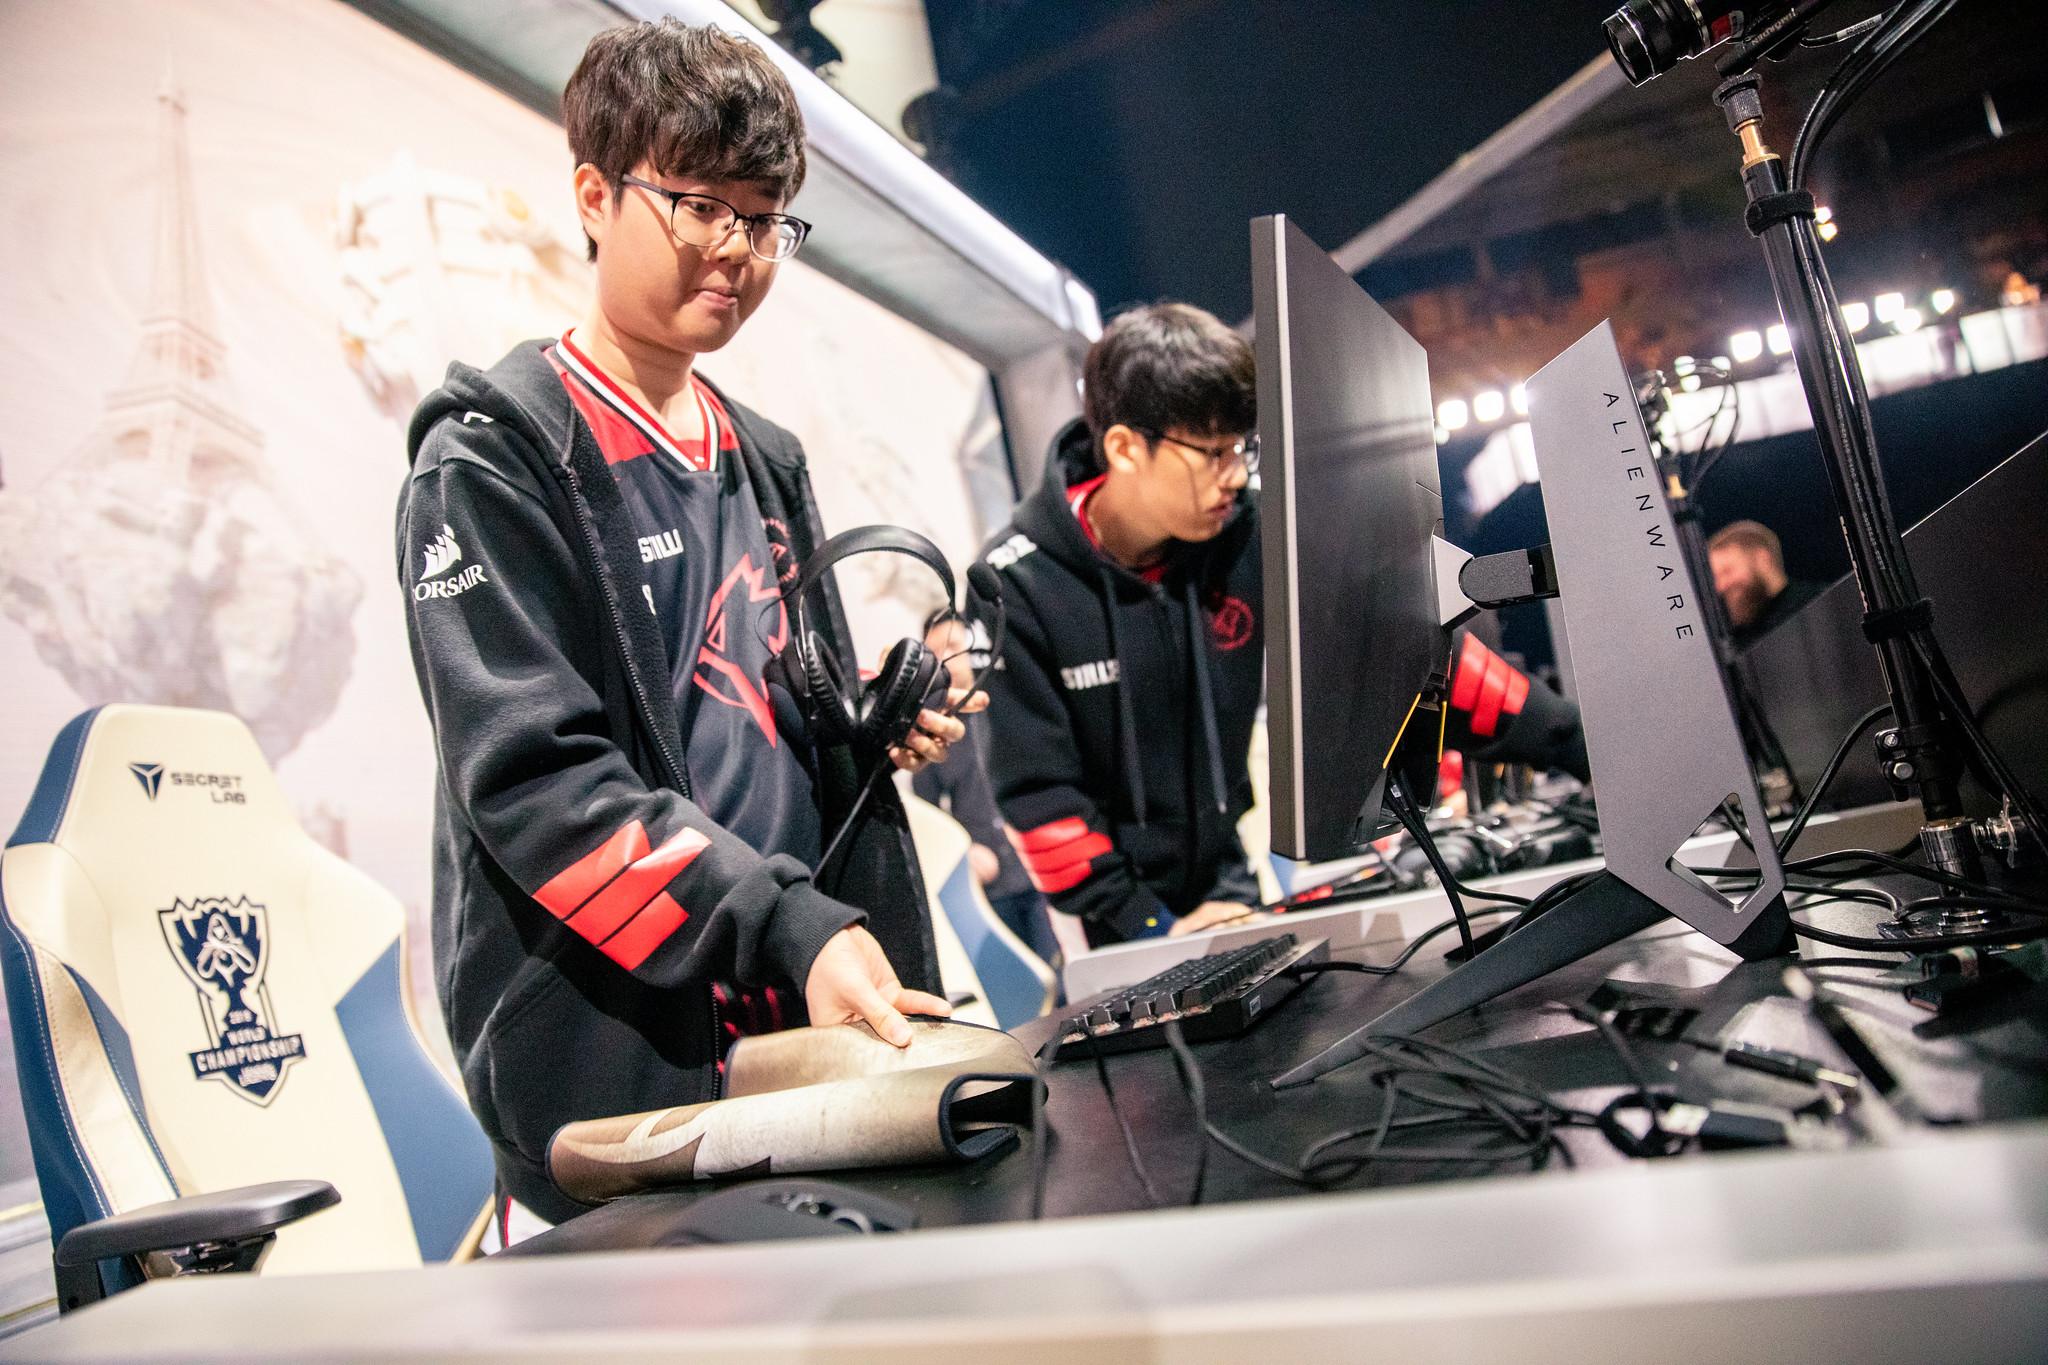 Sword at Worlds 2019 playing for Griffin